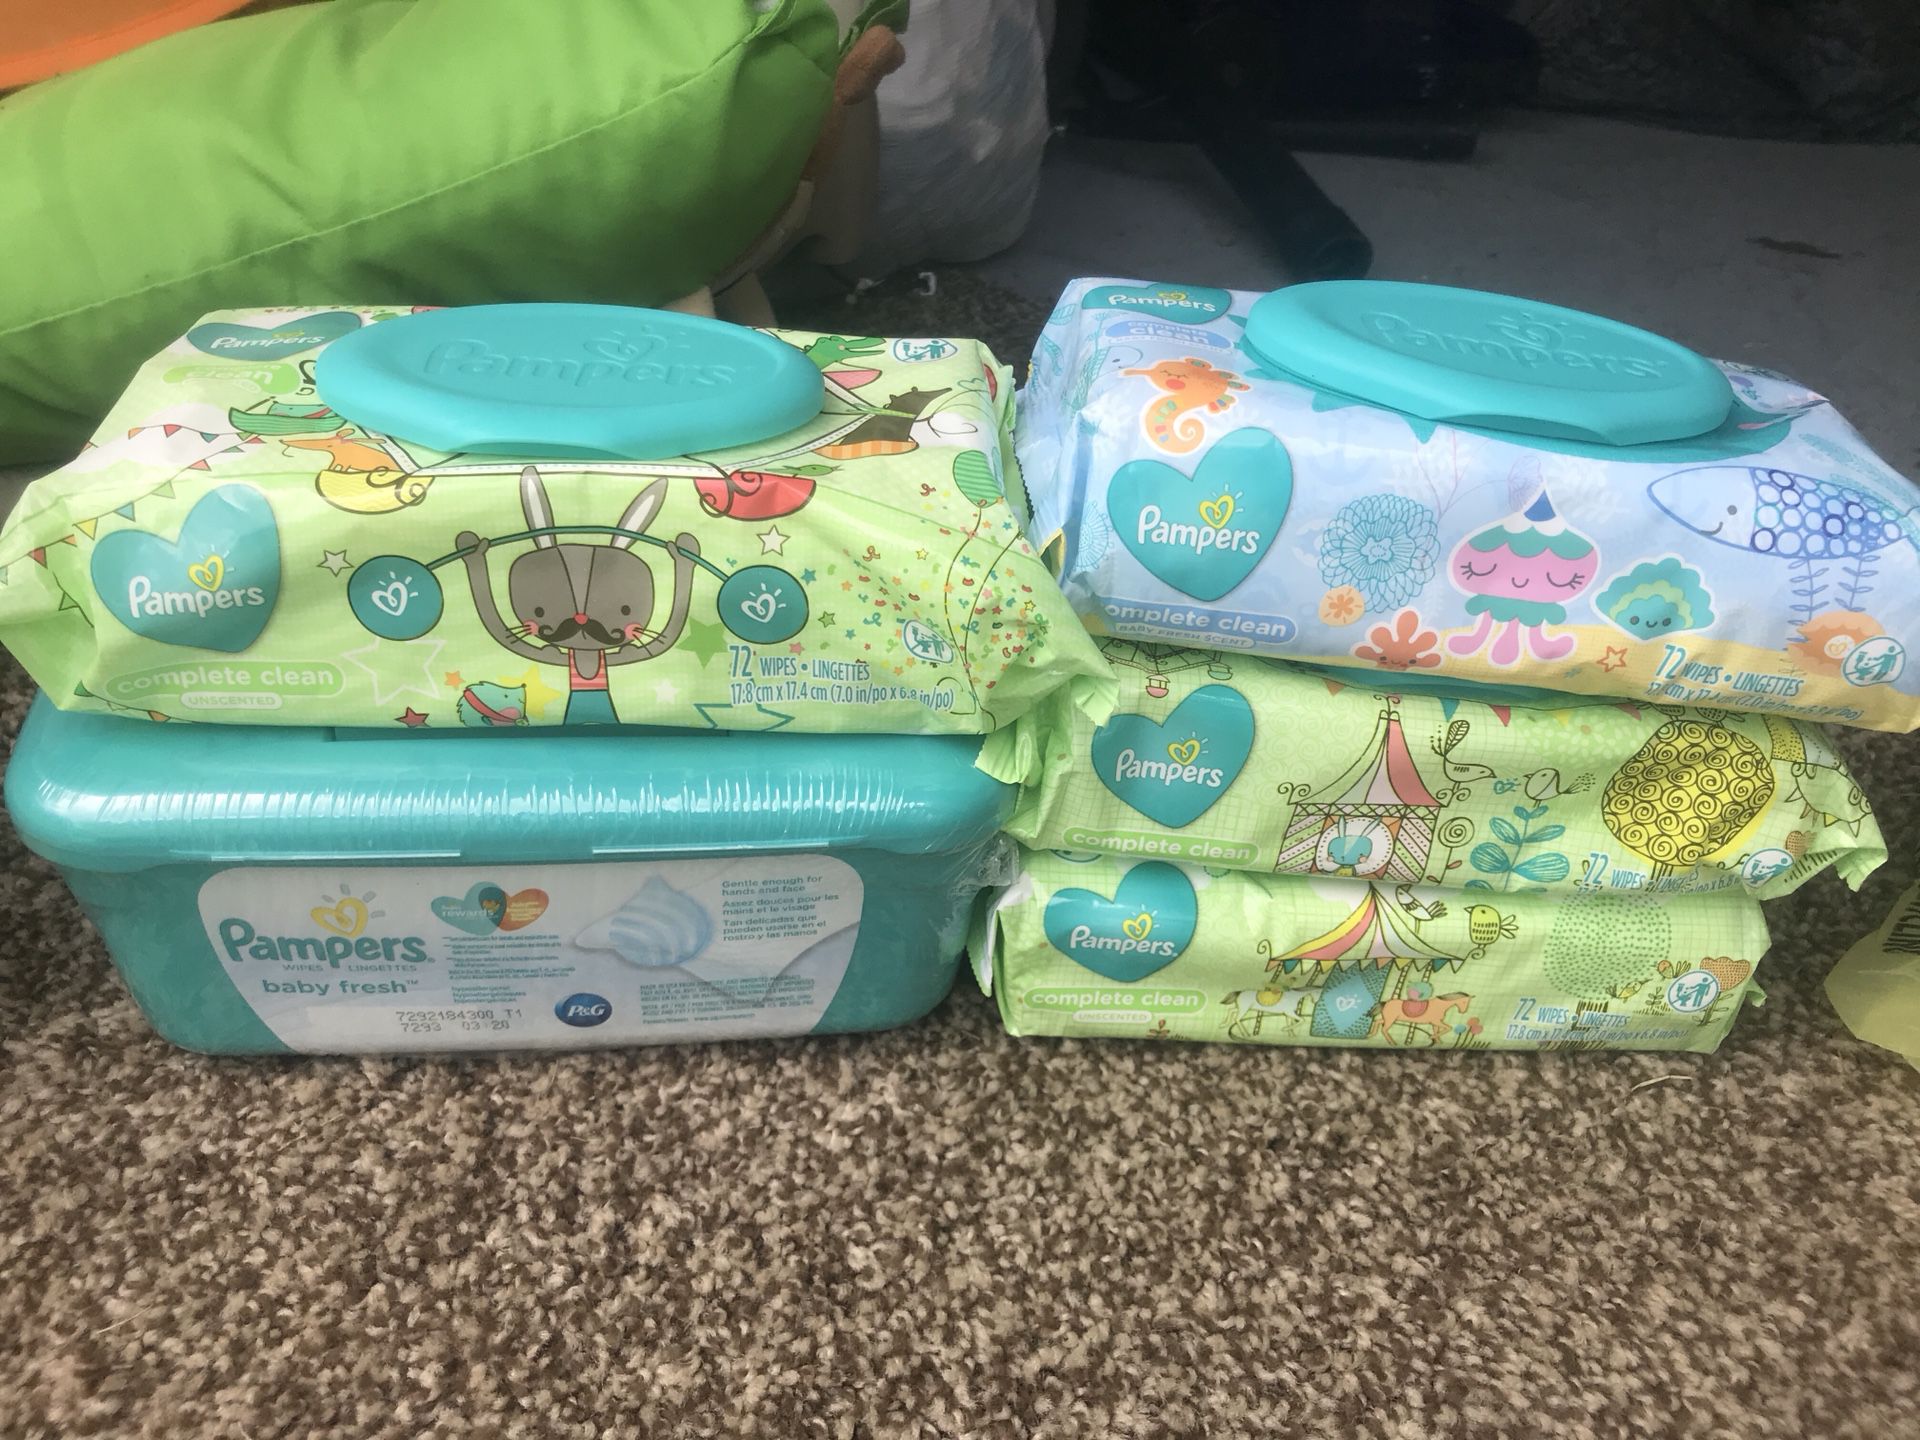 Pampers and Huggies wipes $10 each set